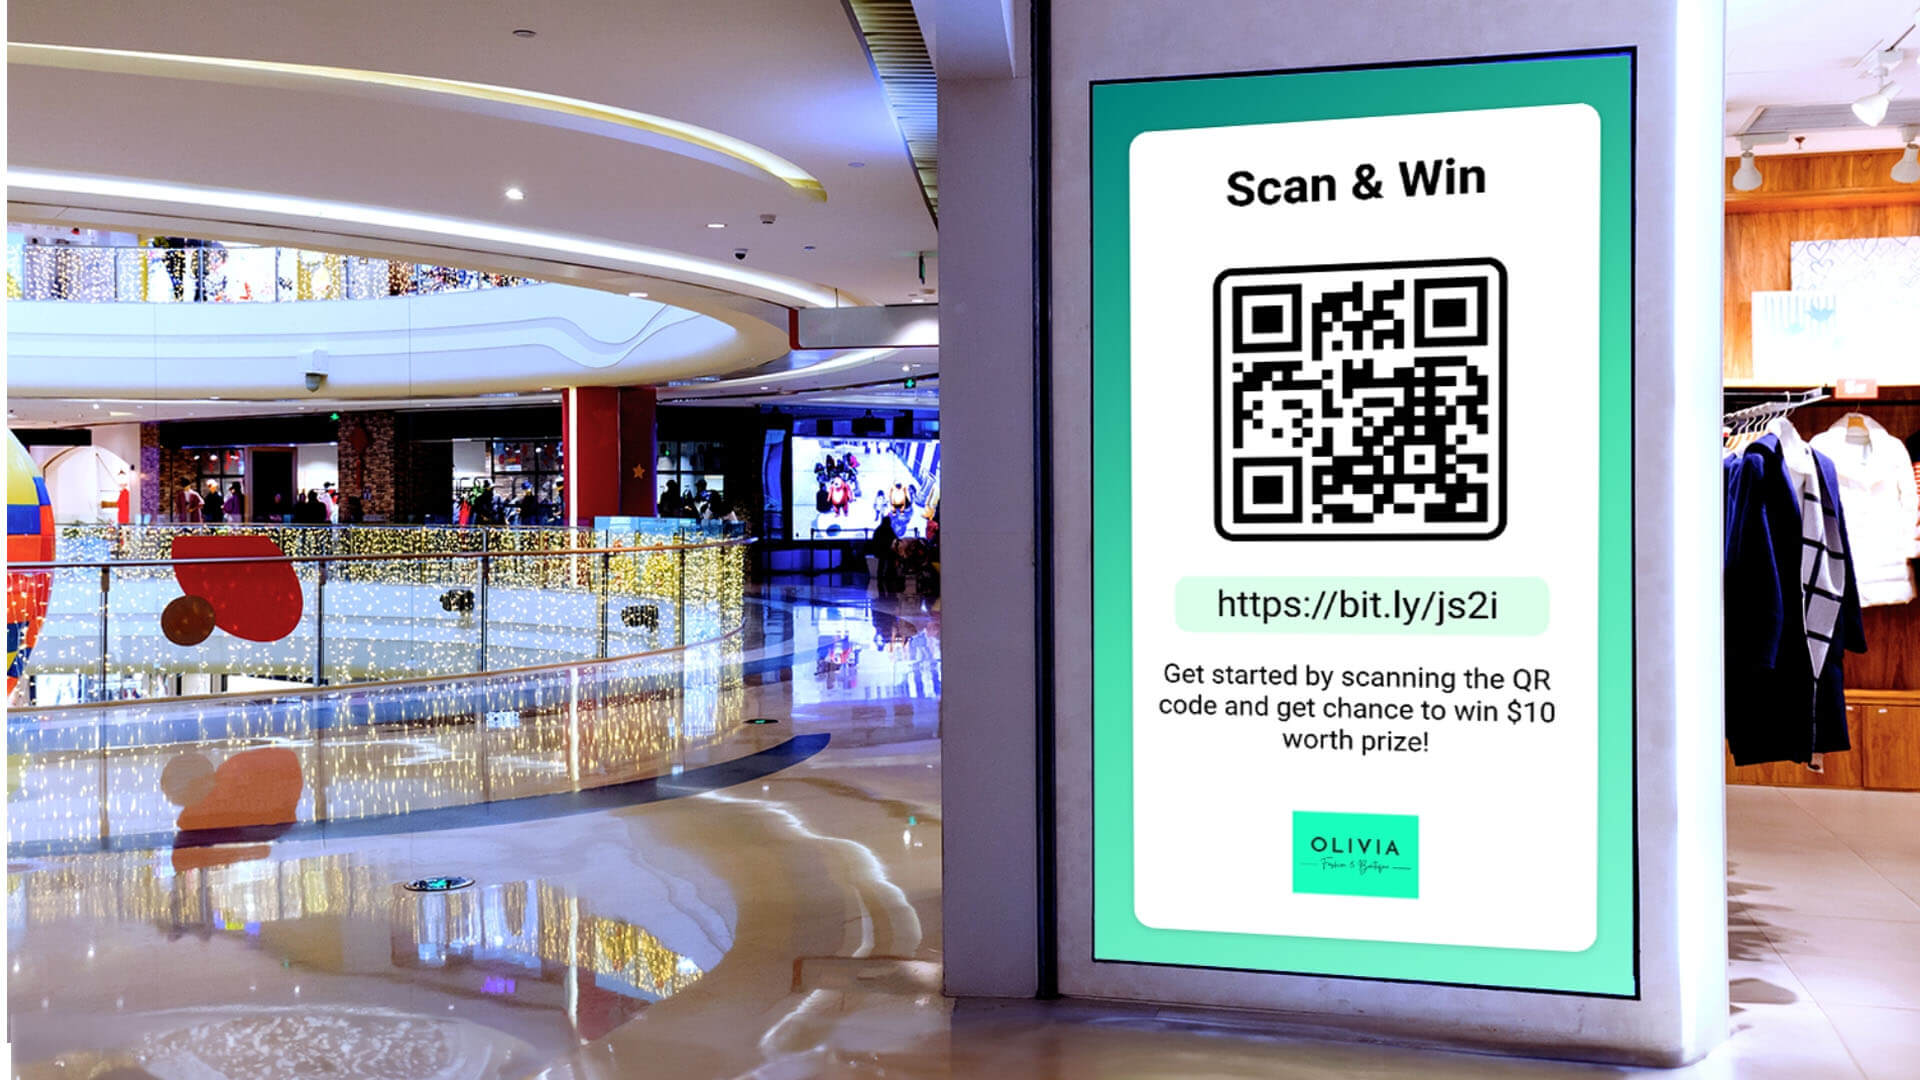 A screen showing a QR code for a lucky draw in a shopping mall.